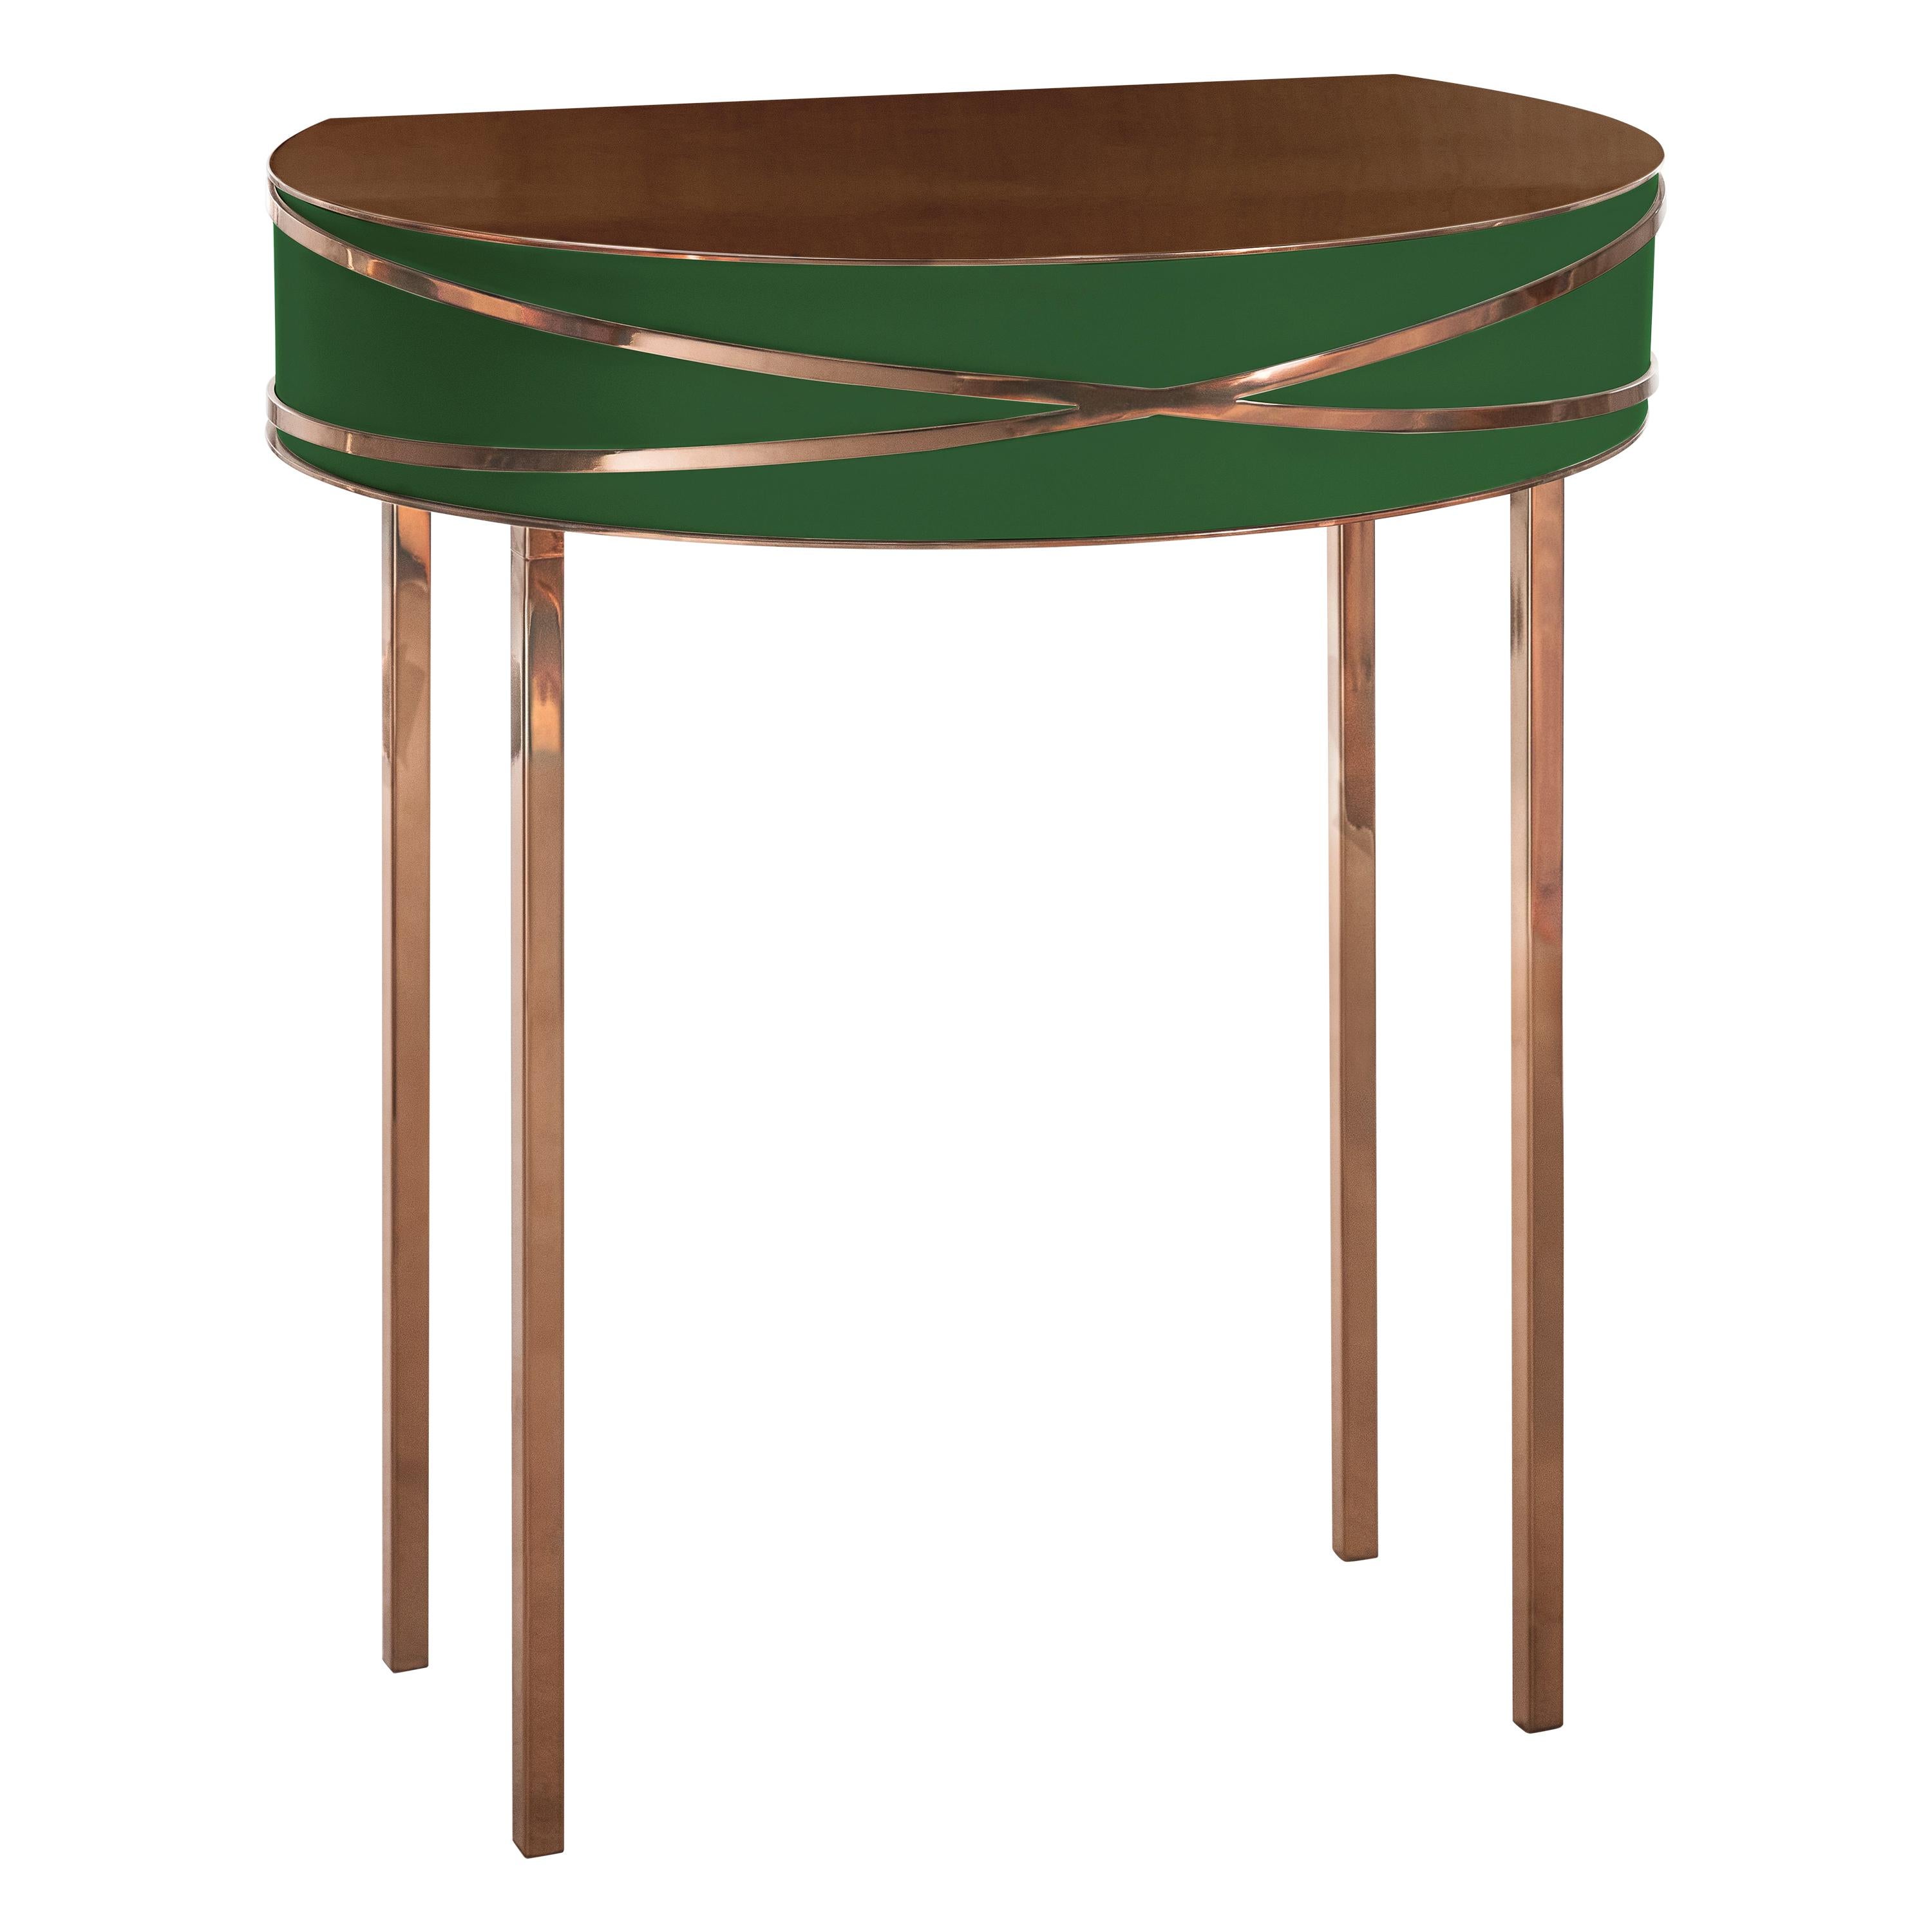 Stella Green Console or Bedside Table with Rose Gold Trims by Nika Zupanc